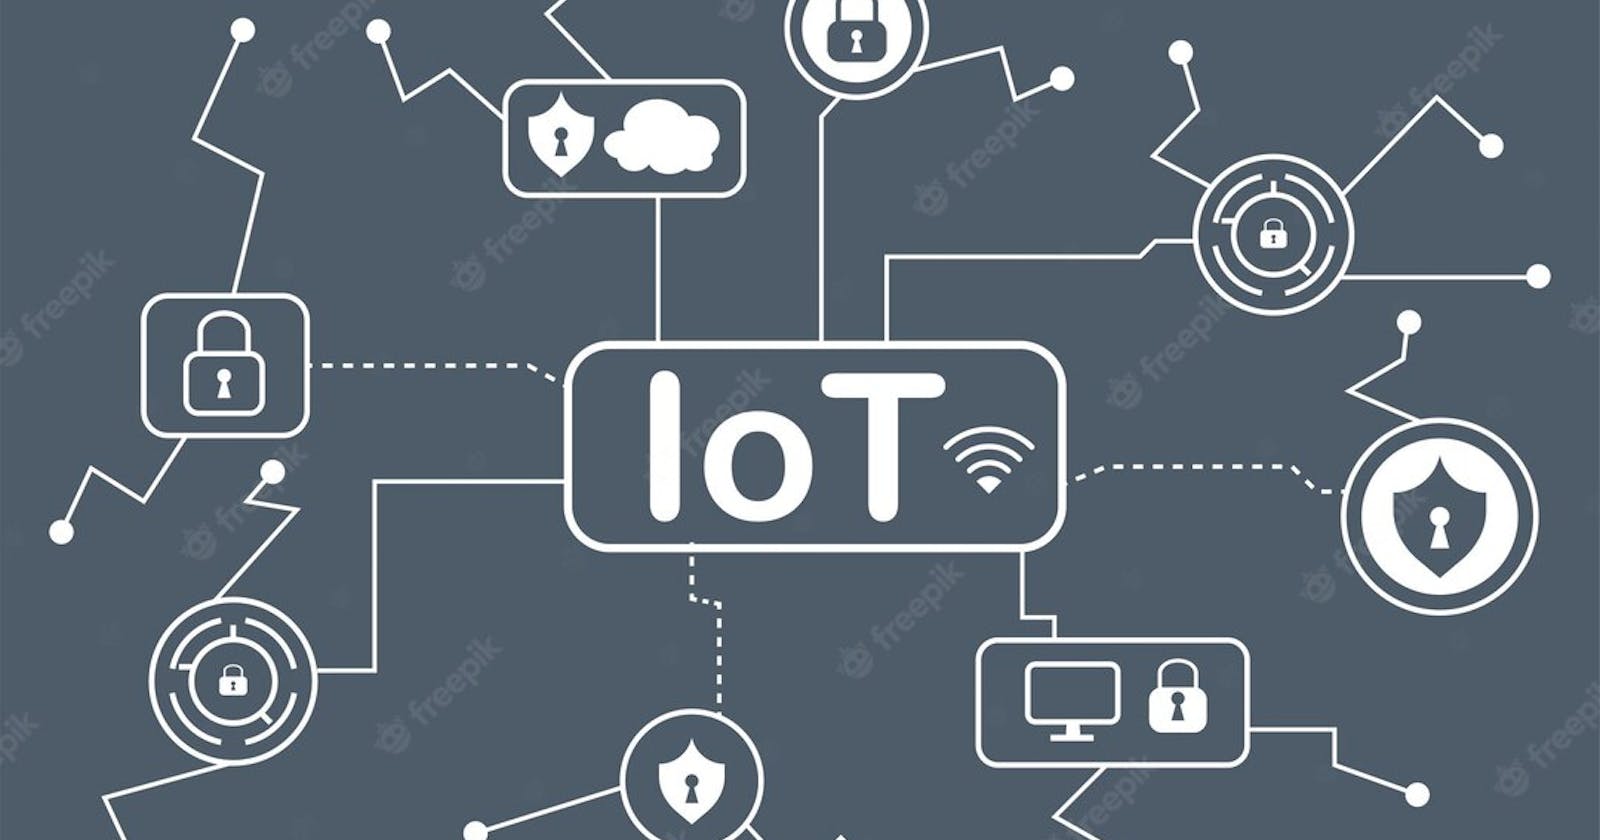 Open Source Projects in the Internet of Things (IoT) Space